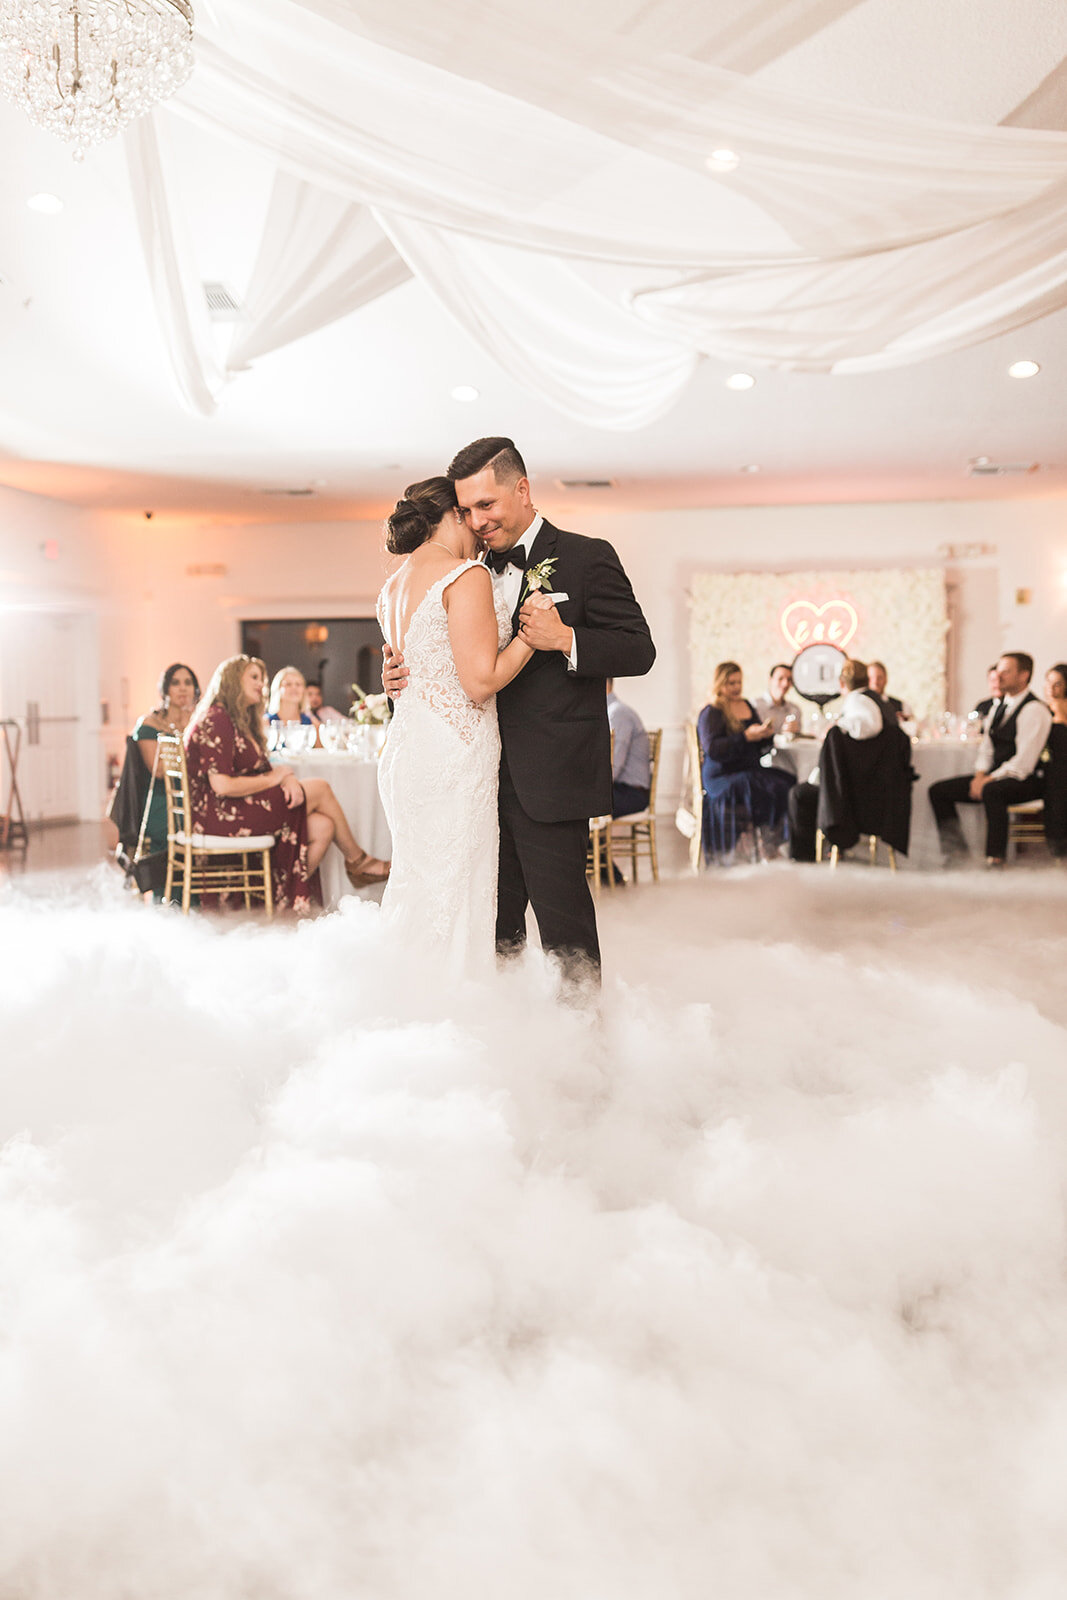 Bluegrass Chic - The Hendricks Photography at Royal Crest Room dancing on a cloud